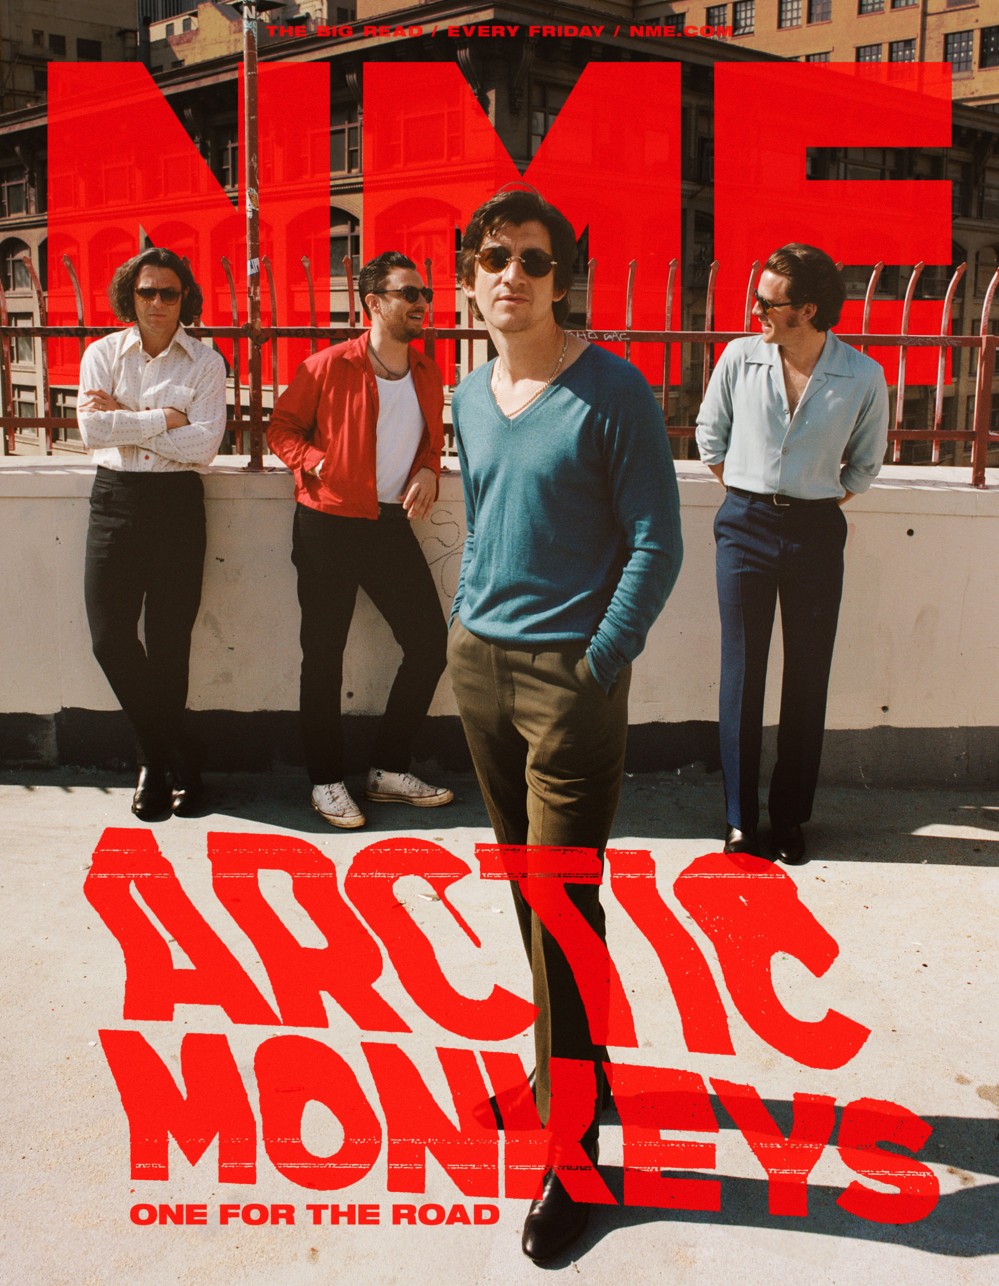 Arctic Monkeys on the cover of NME